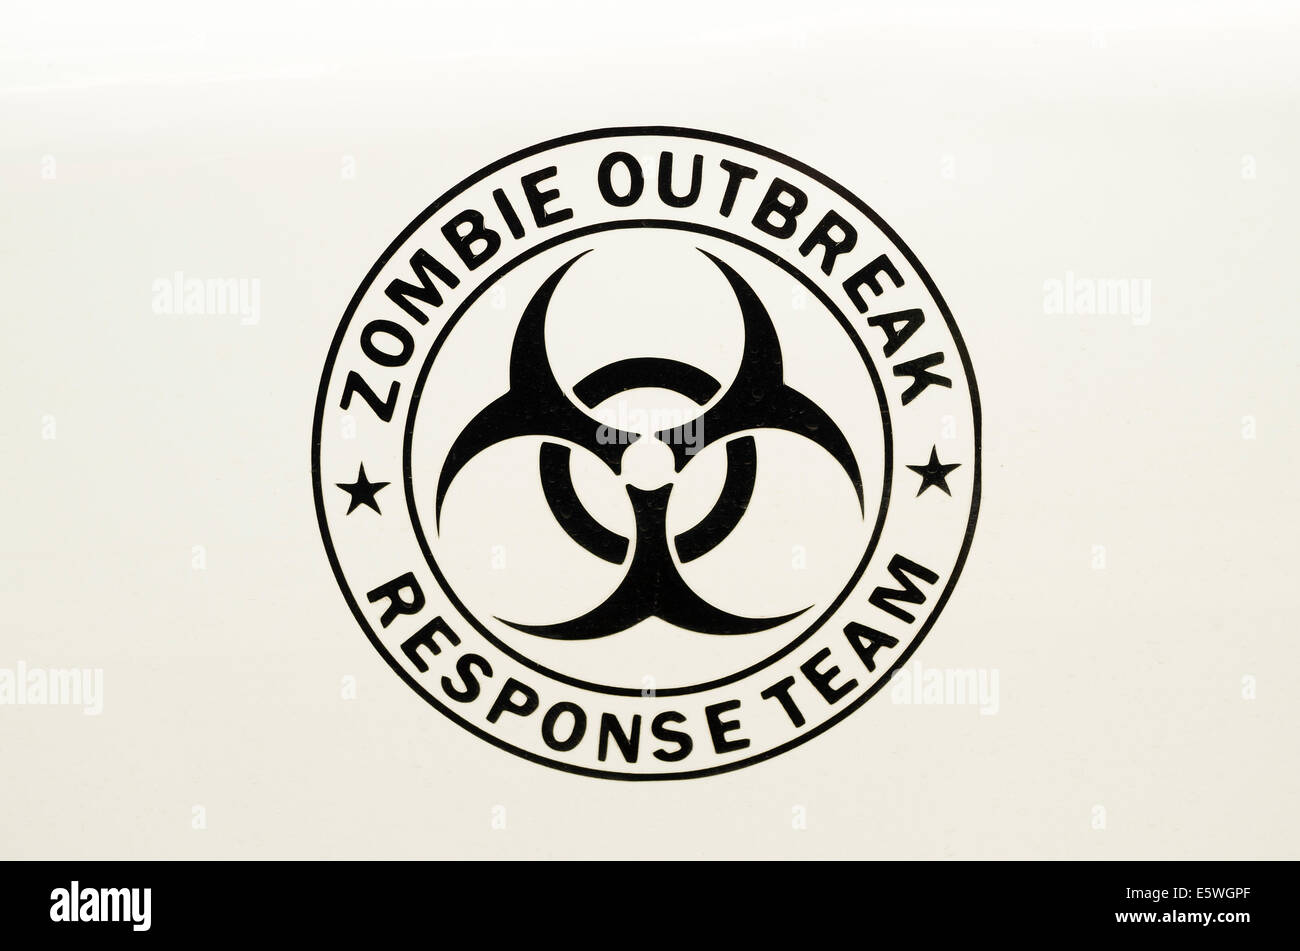 Sign and logo concerning Zombies on verhicle in UK Stock Photo